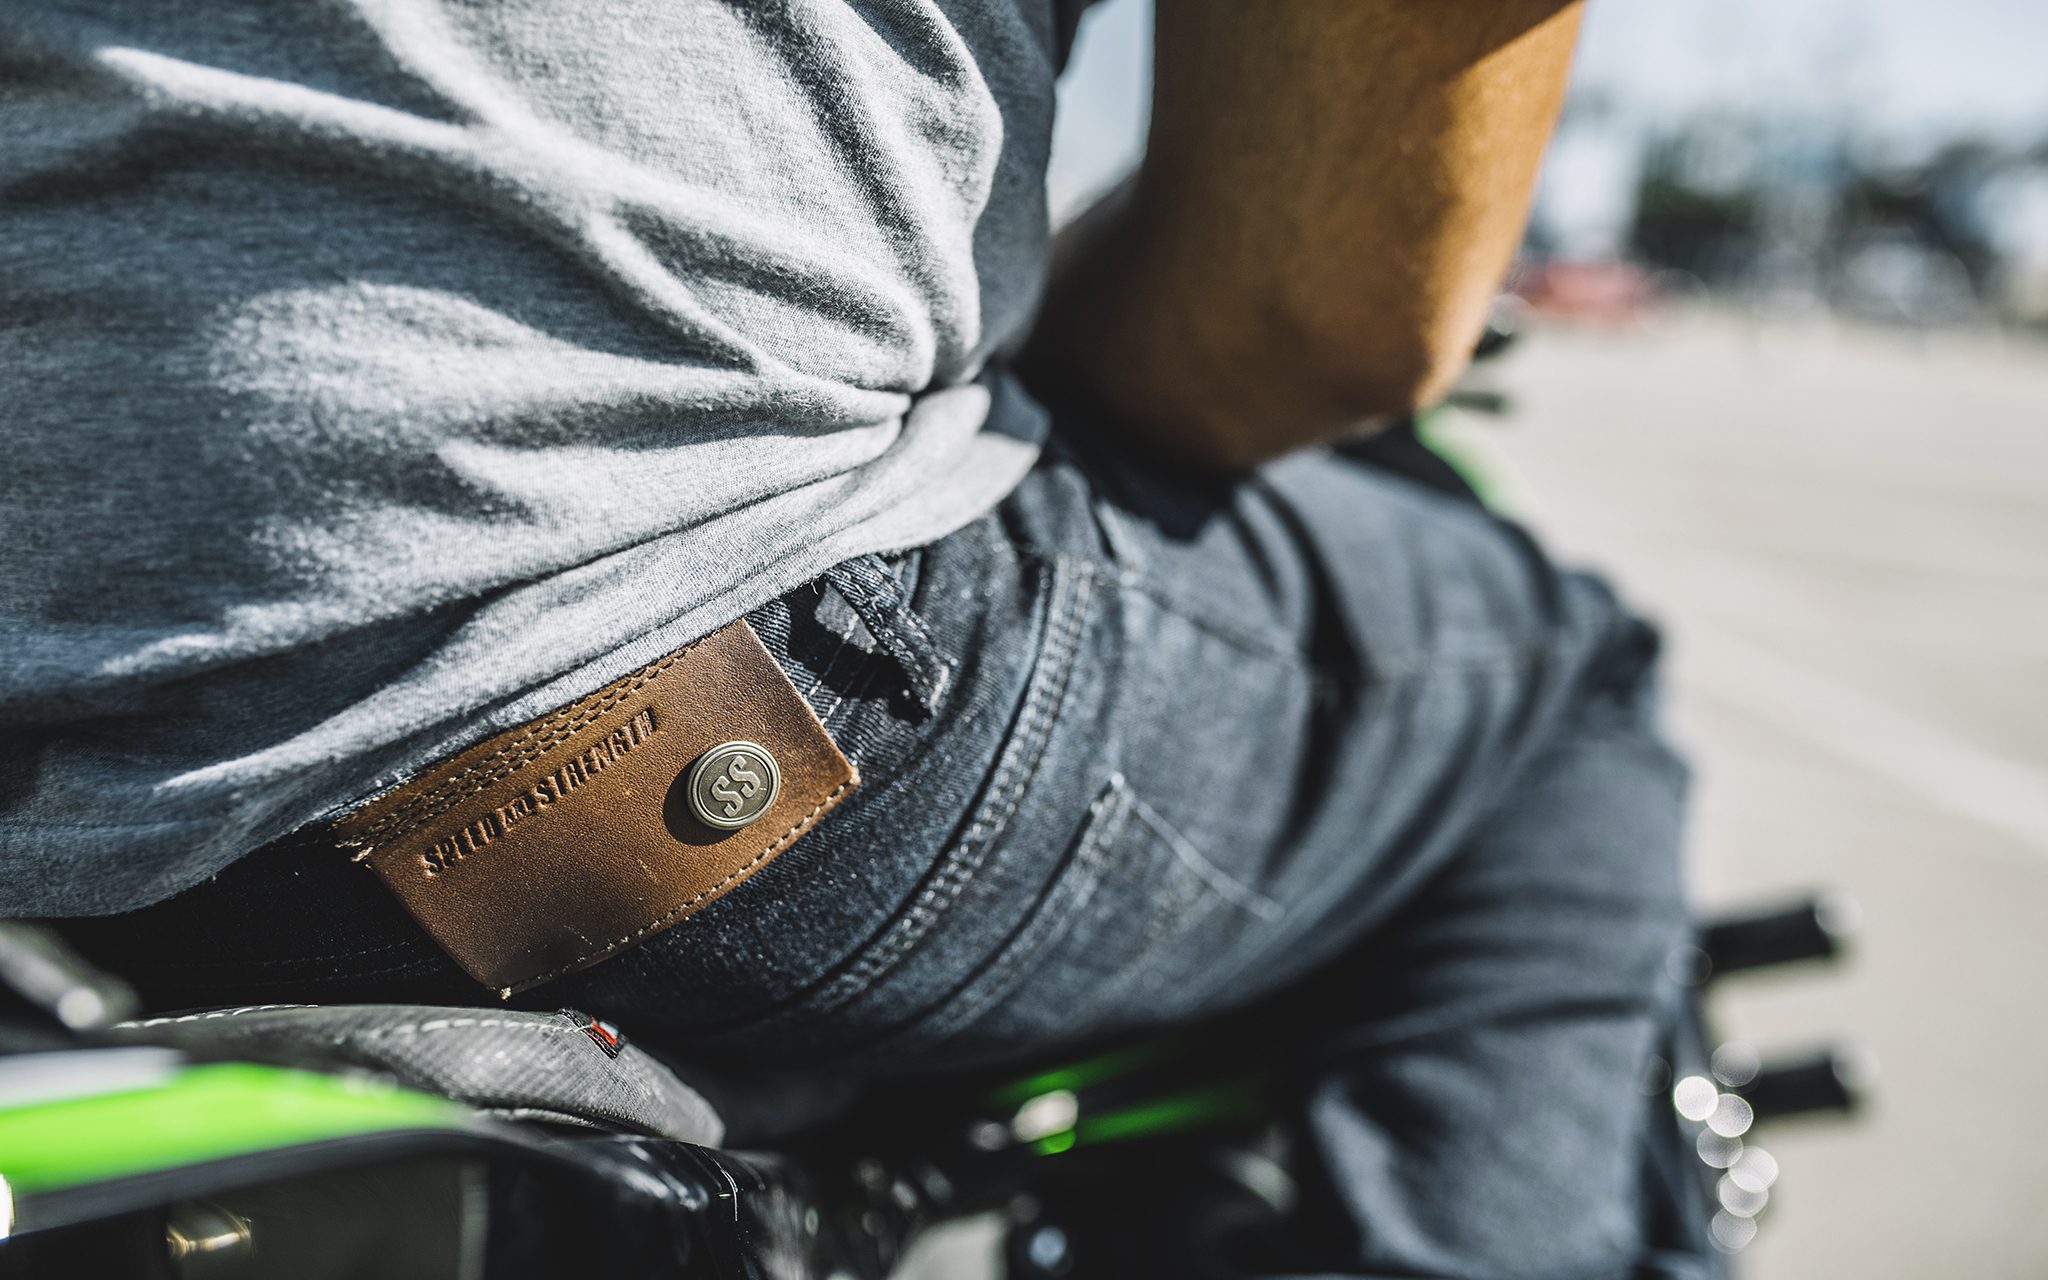 Close up shot of rider wearing motorcycle jeans while sitting on bike